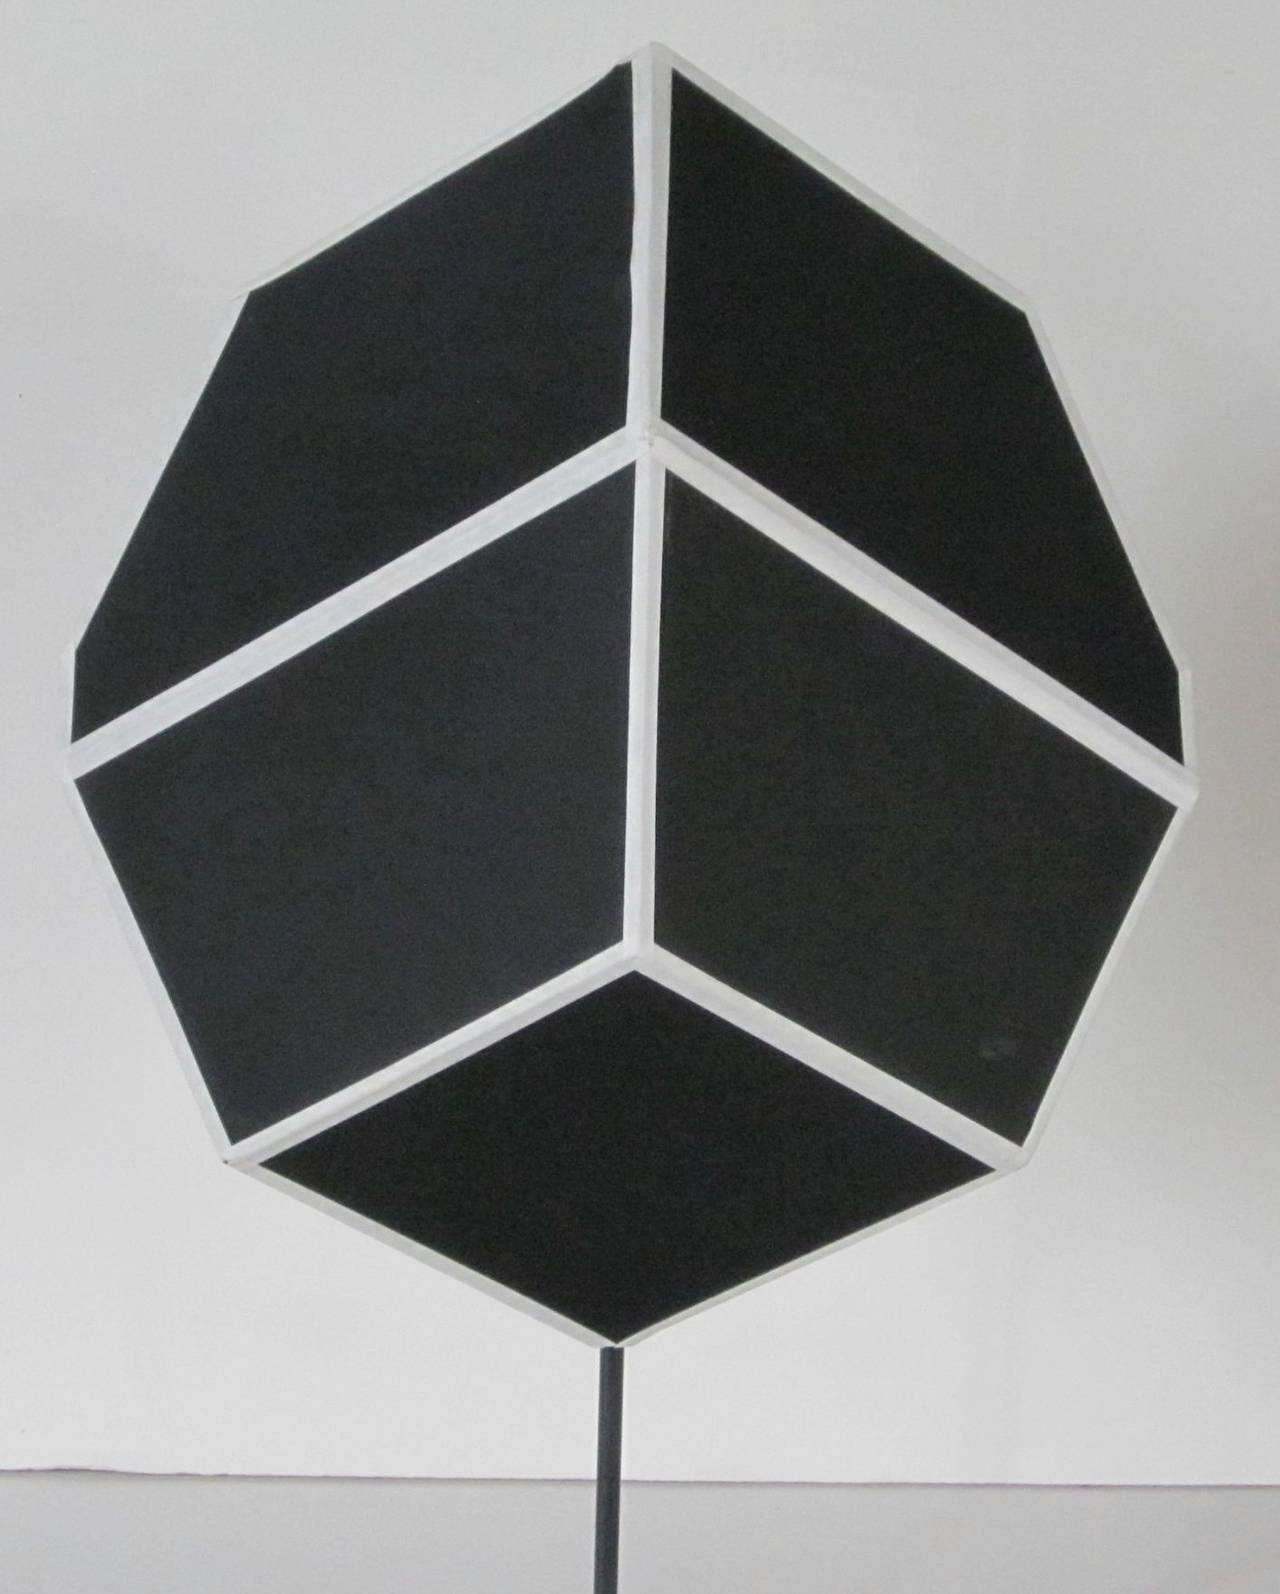 Unique black with white trim paper architectural molecule on a custom metal stand.
The metal stand base measures 4